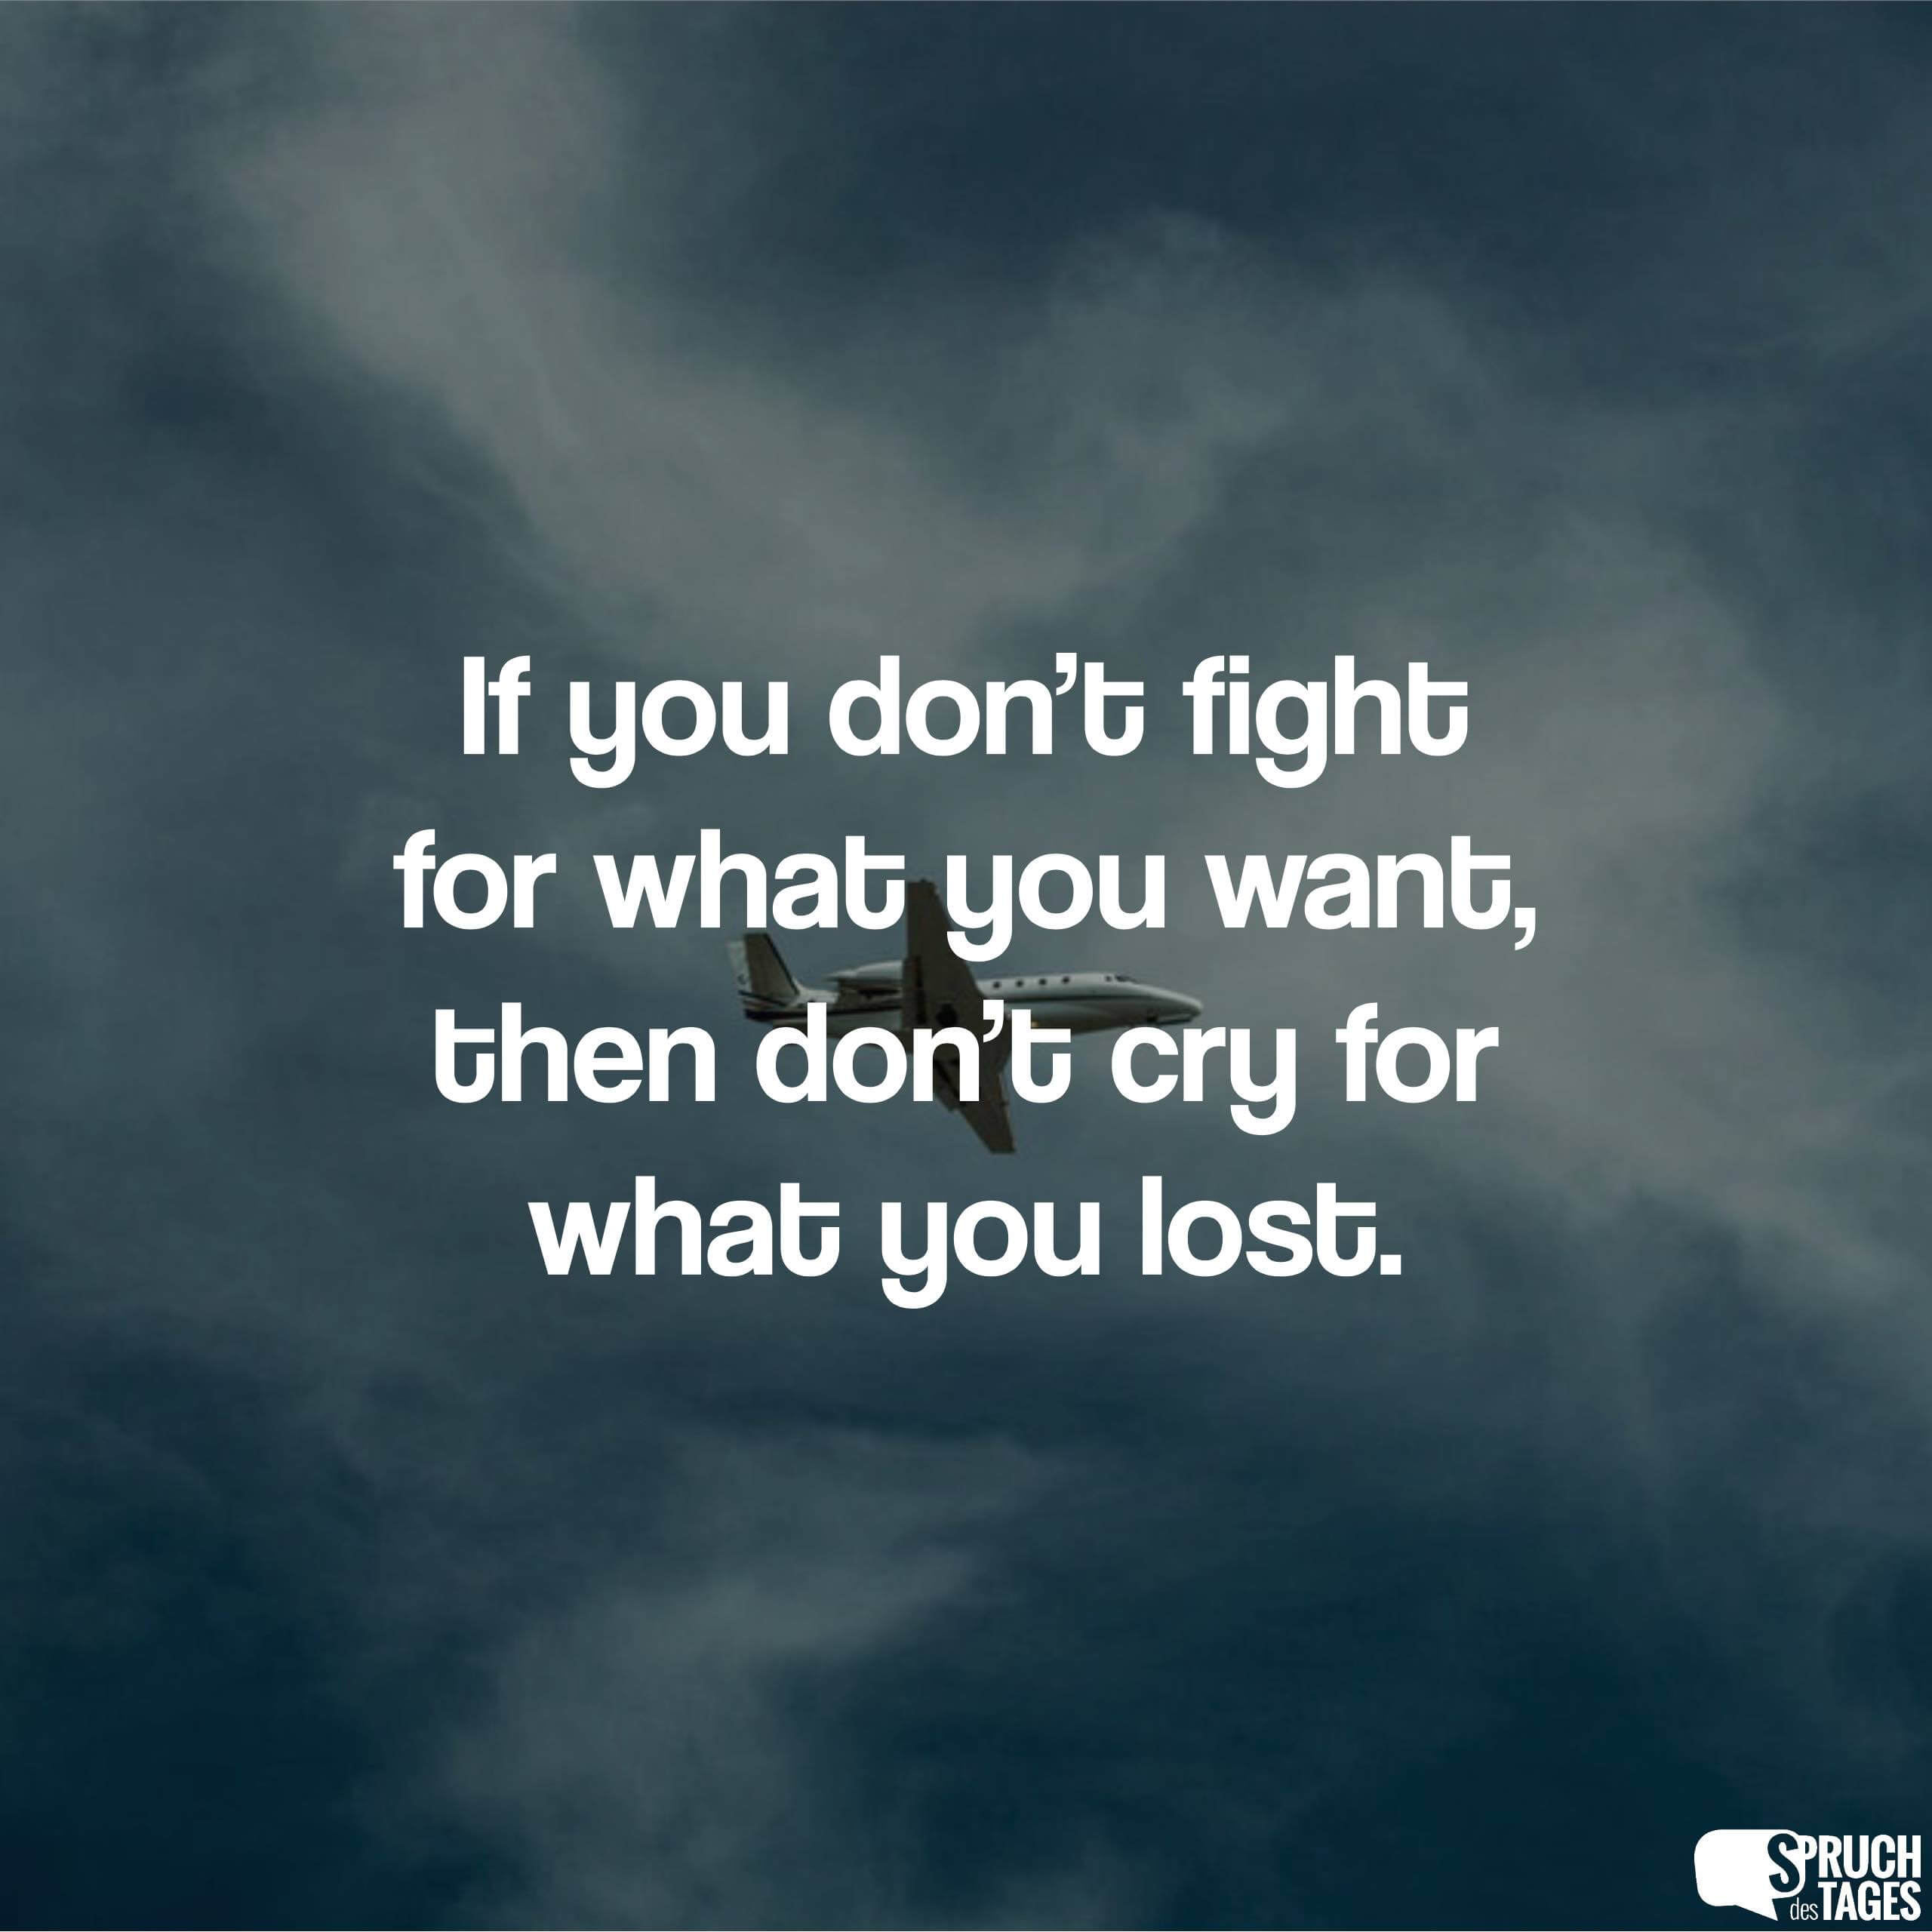 If you don’t fight for what you want, then don’t cry for what you lost.